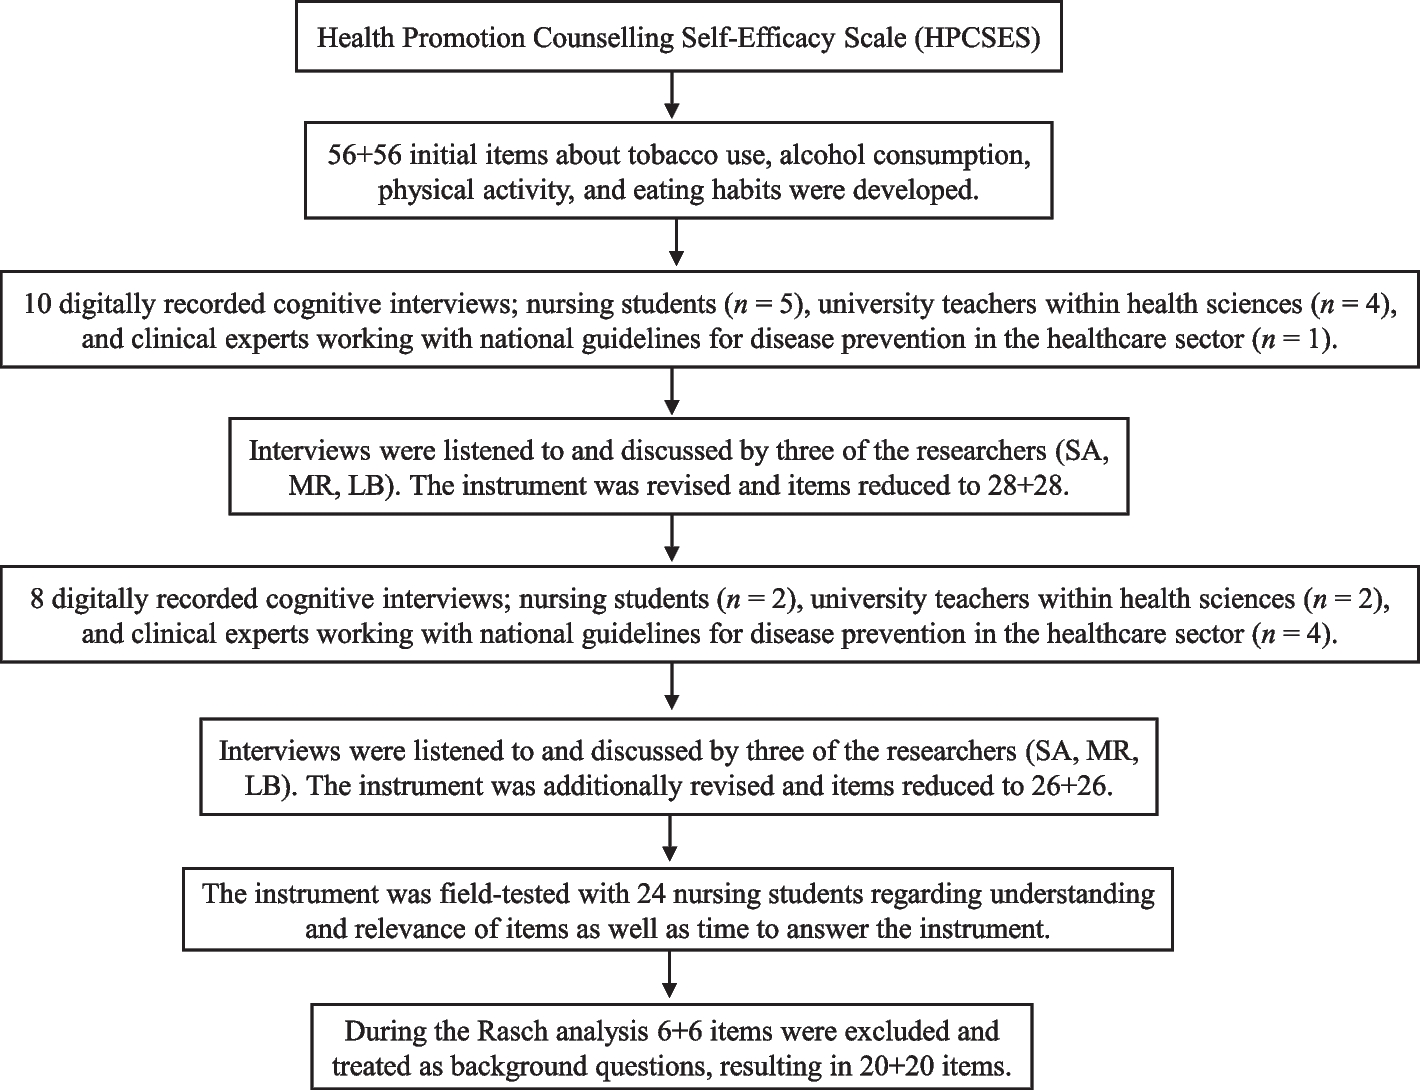 Development and quality assessment of the psychometric properties of the Self-Efficacy in Lifestyle Counselling scale (SELC 20 + 20) using Rasch analysis